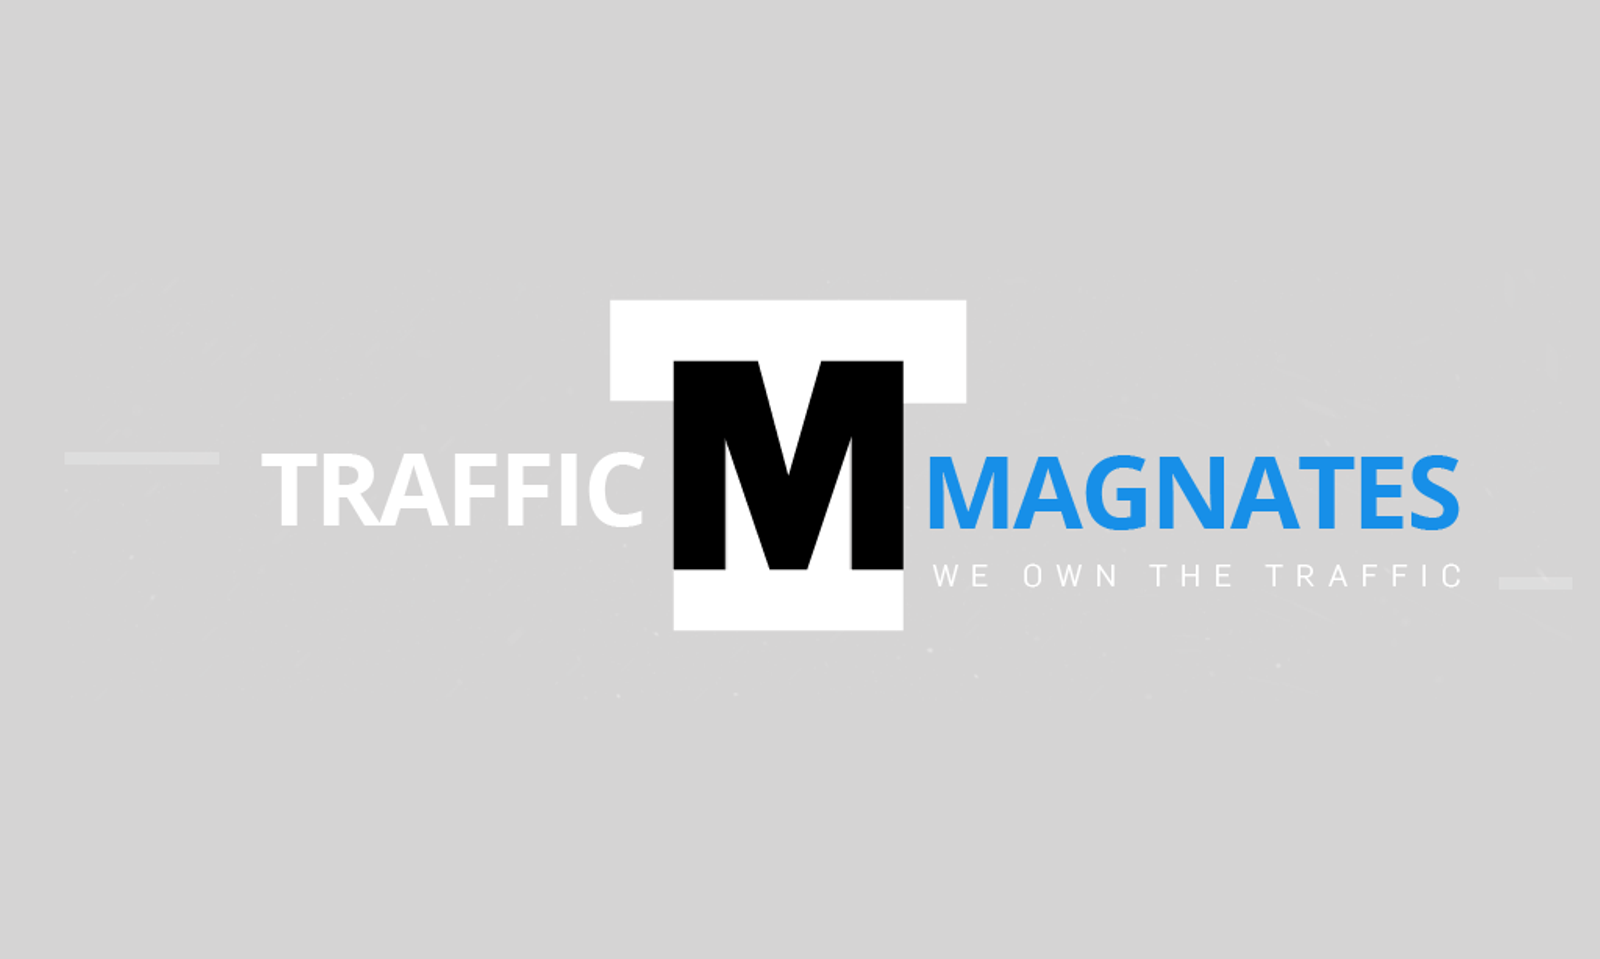 Traffic Magnates Offers Hi-Quality Traffic from Own Tube Network